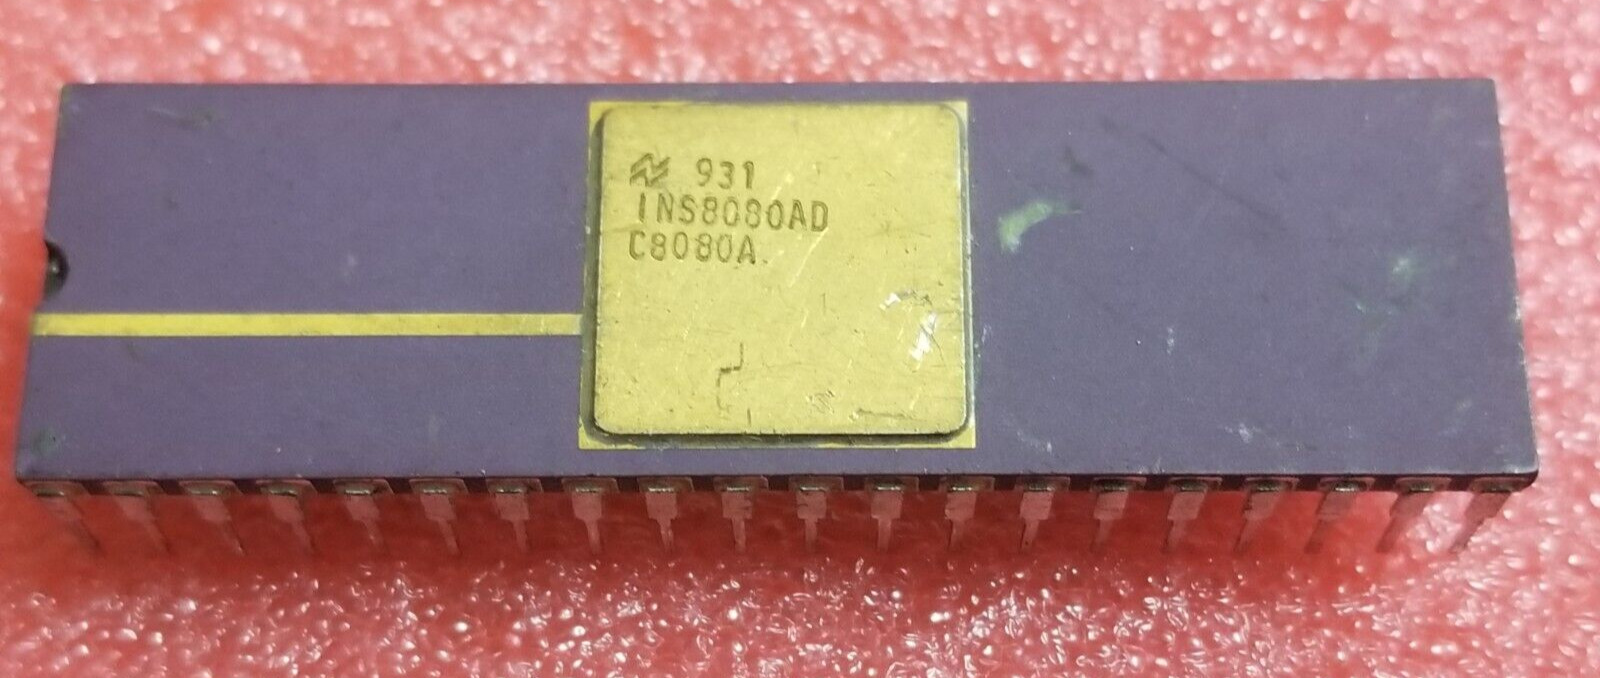 ✅ Vintage National Semiconductor INS8080AD C8080A Gold/Ceramic CPU 40 pins